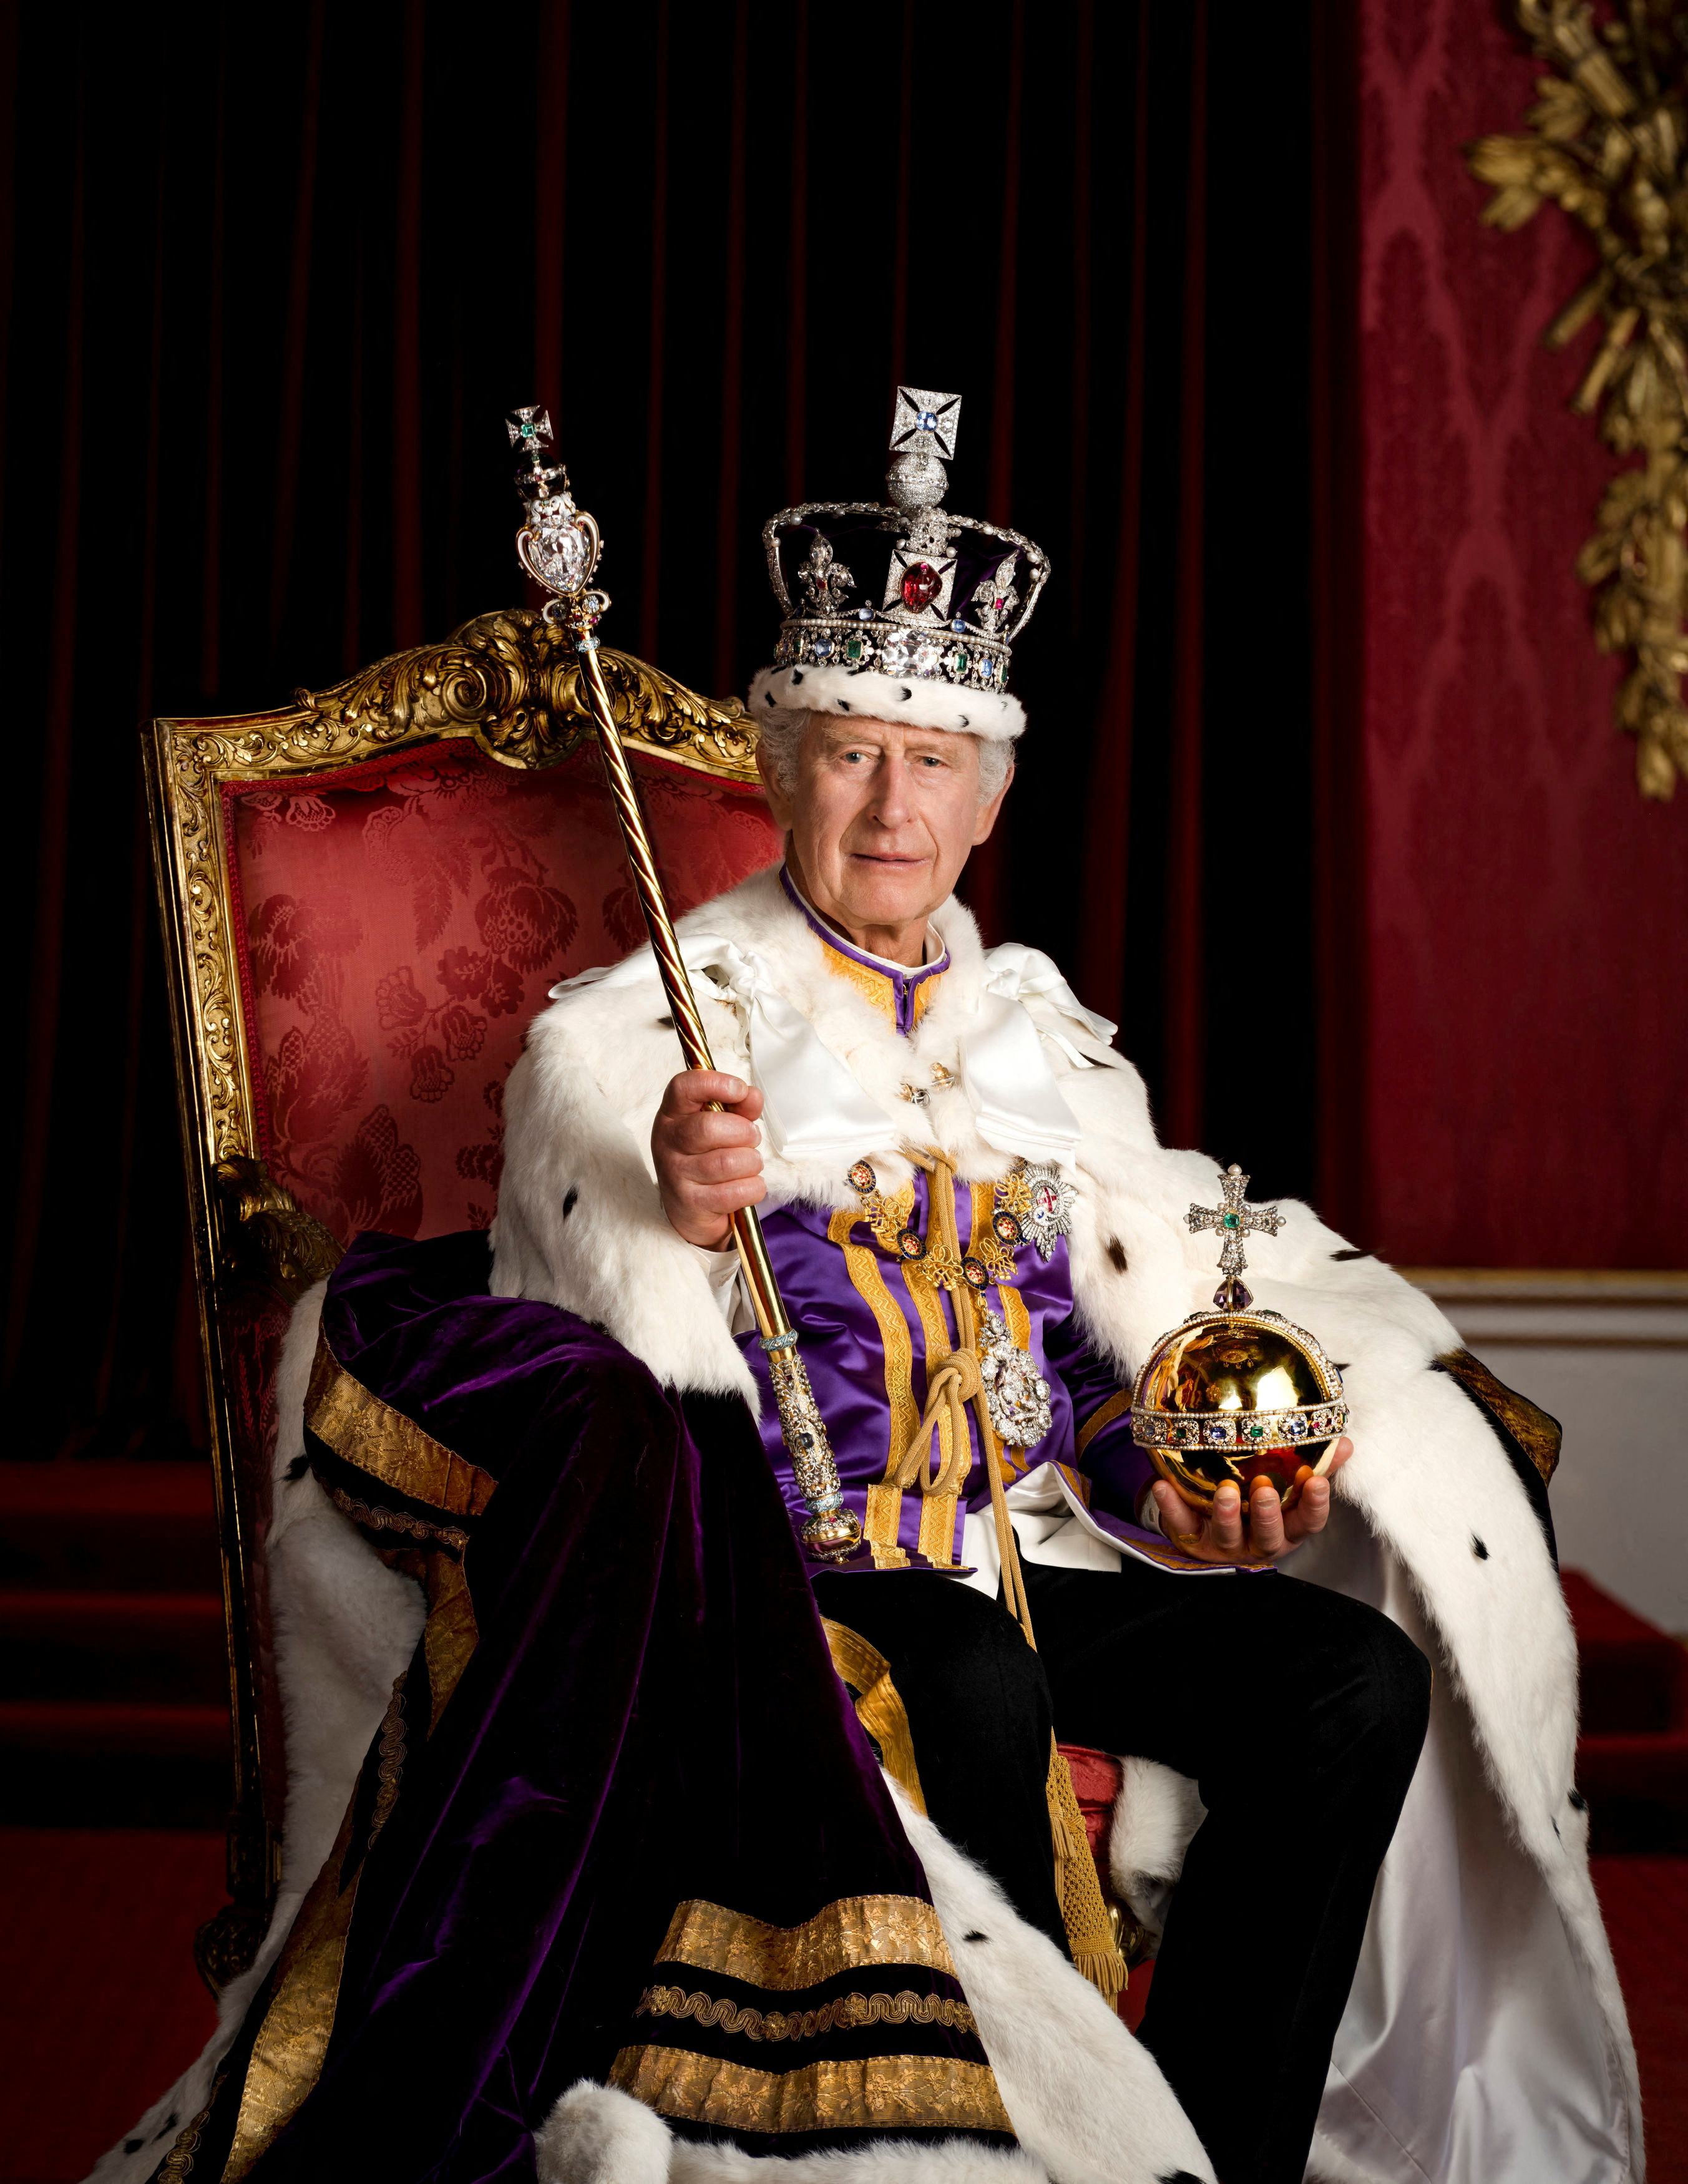 King Charles sits on a throne, in a crown holding an orb and sceptre.